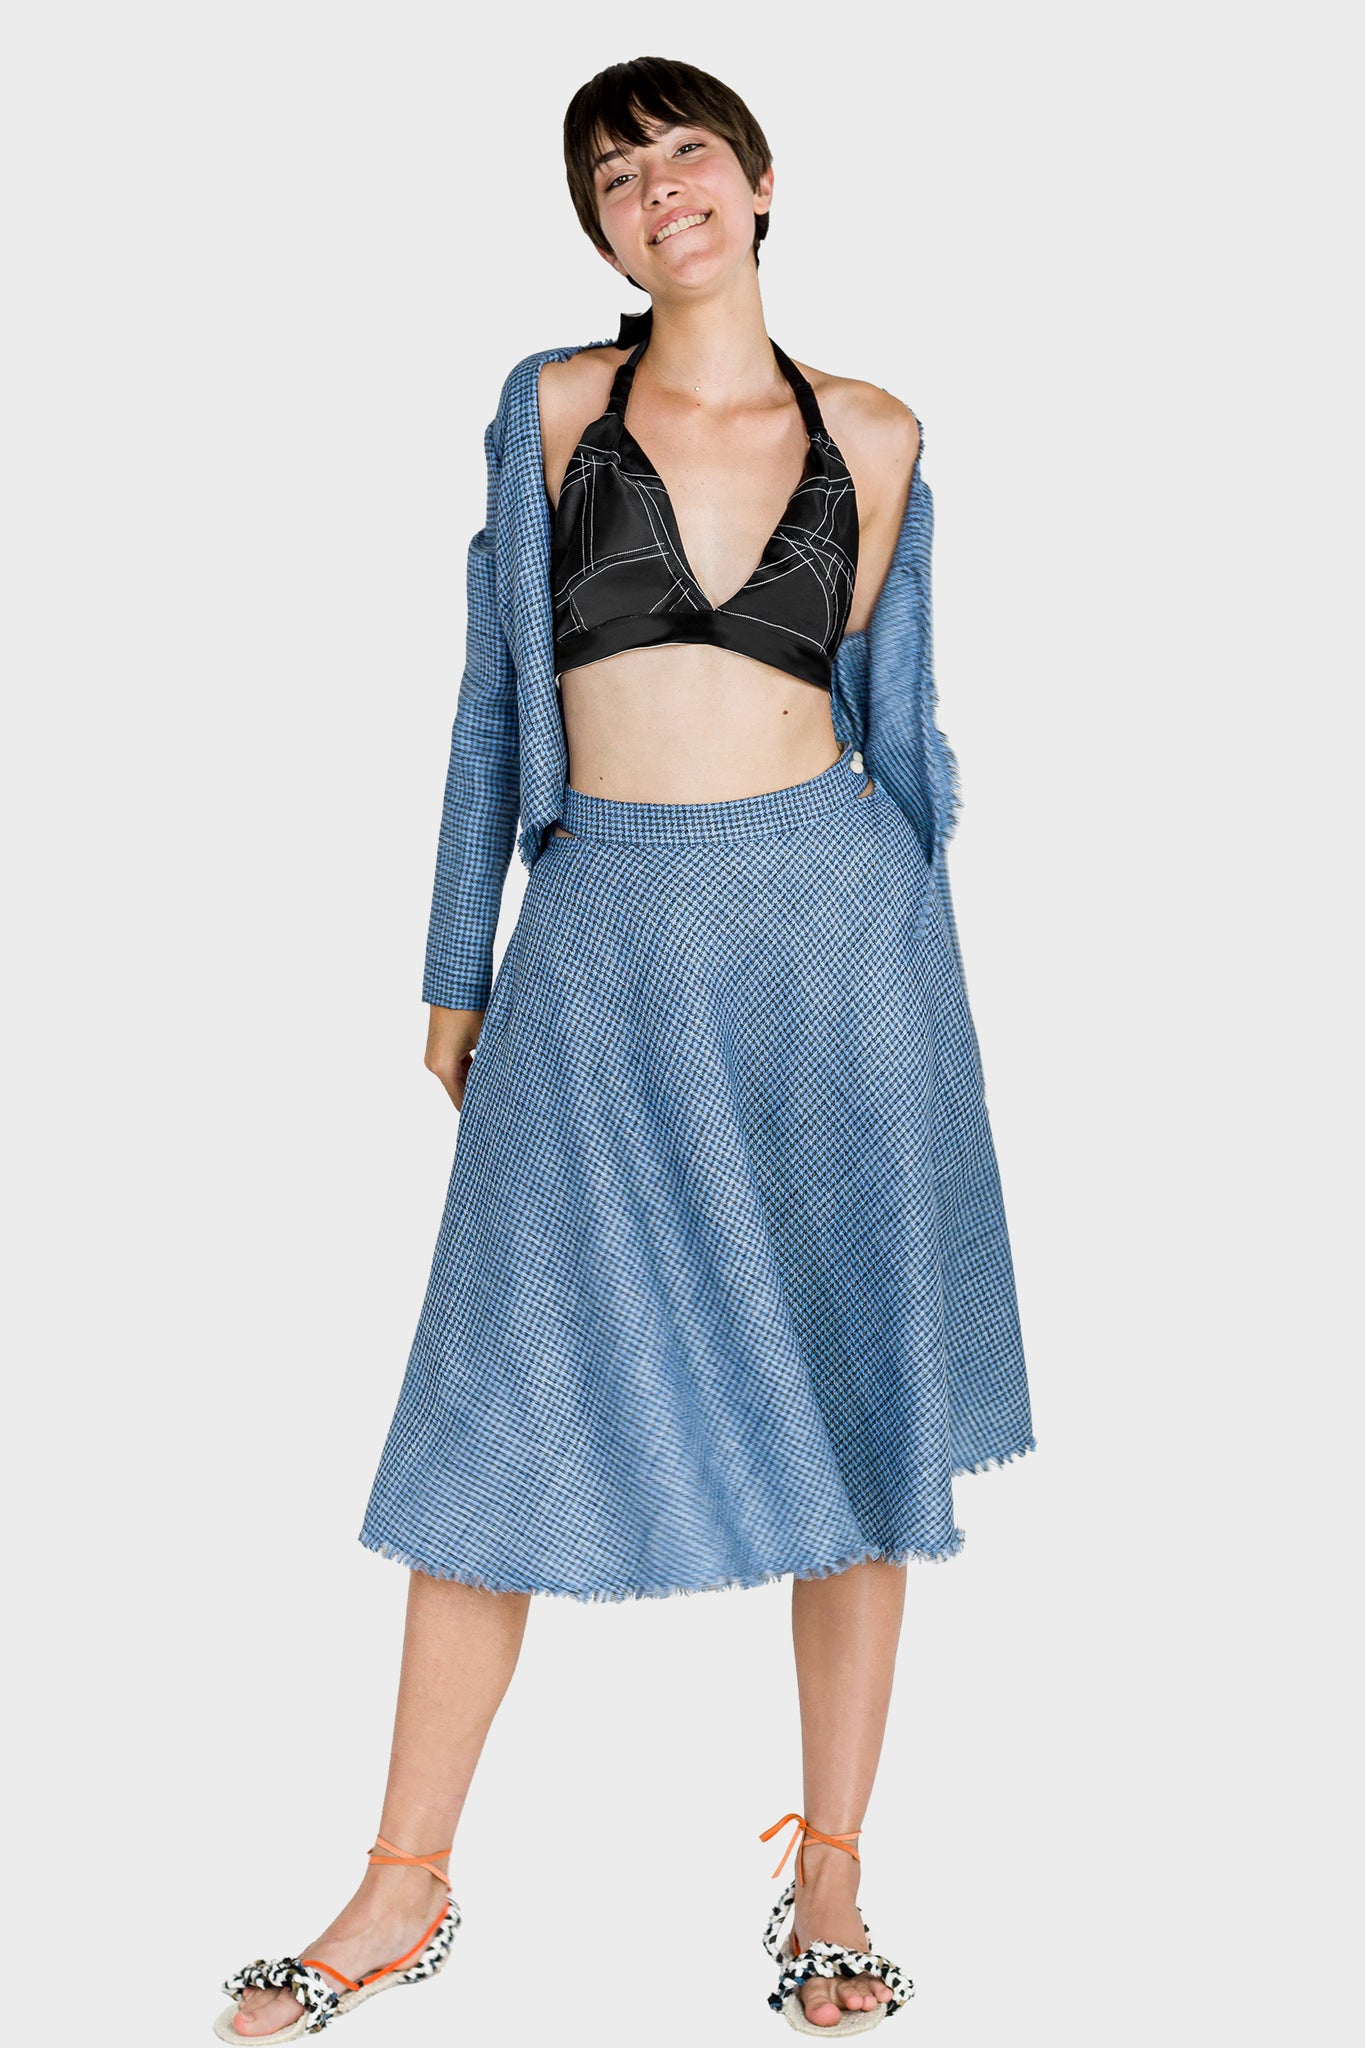 Ruxandra, luxury look, houndstooth pattern bias cut skirt with black silk bra and matching blouse, sexy and elegant, youthful energy, fringed details, side cutouts showing your hops underneath the skirt